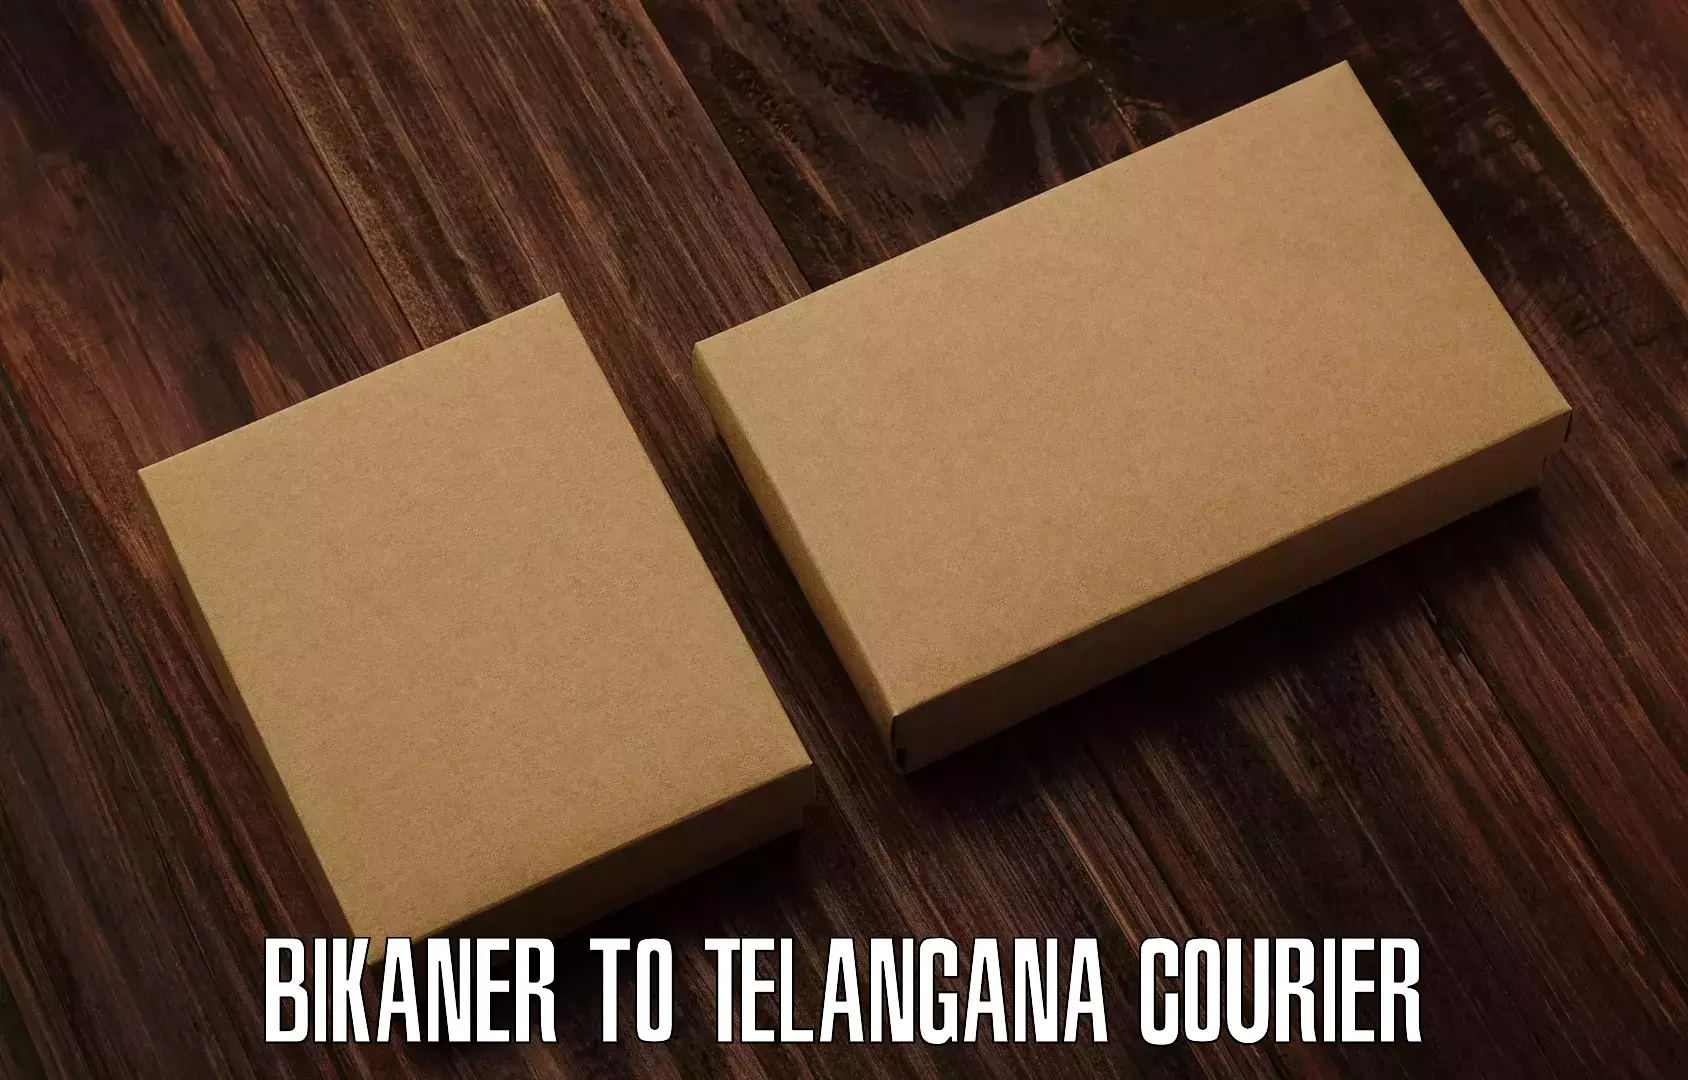 User-friendly delivery service Bikaner to Telangana